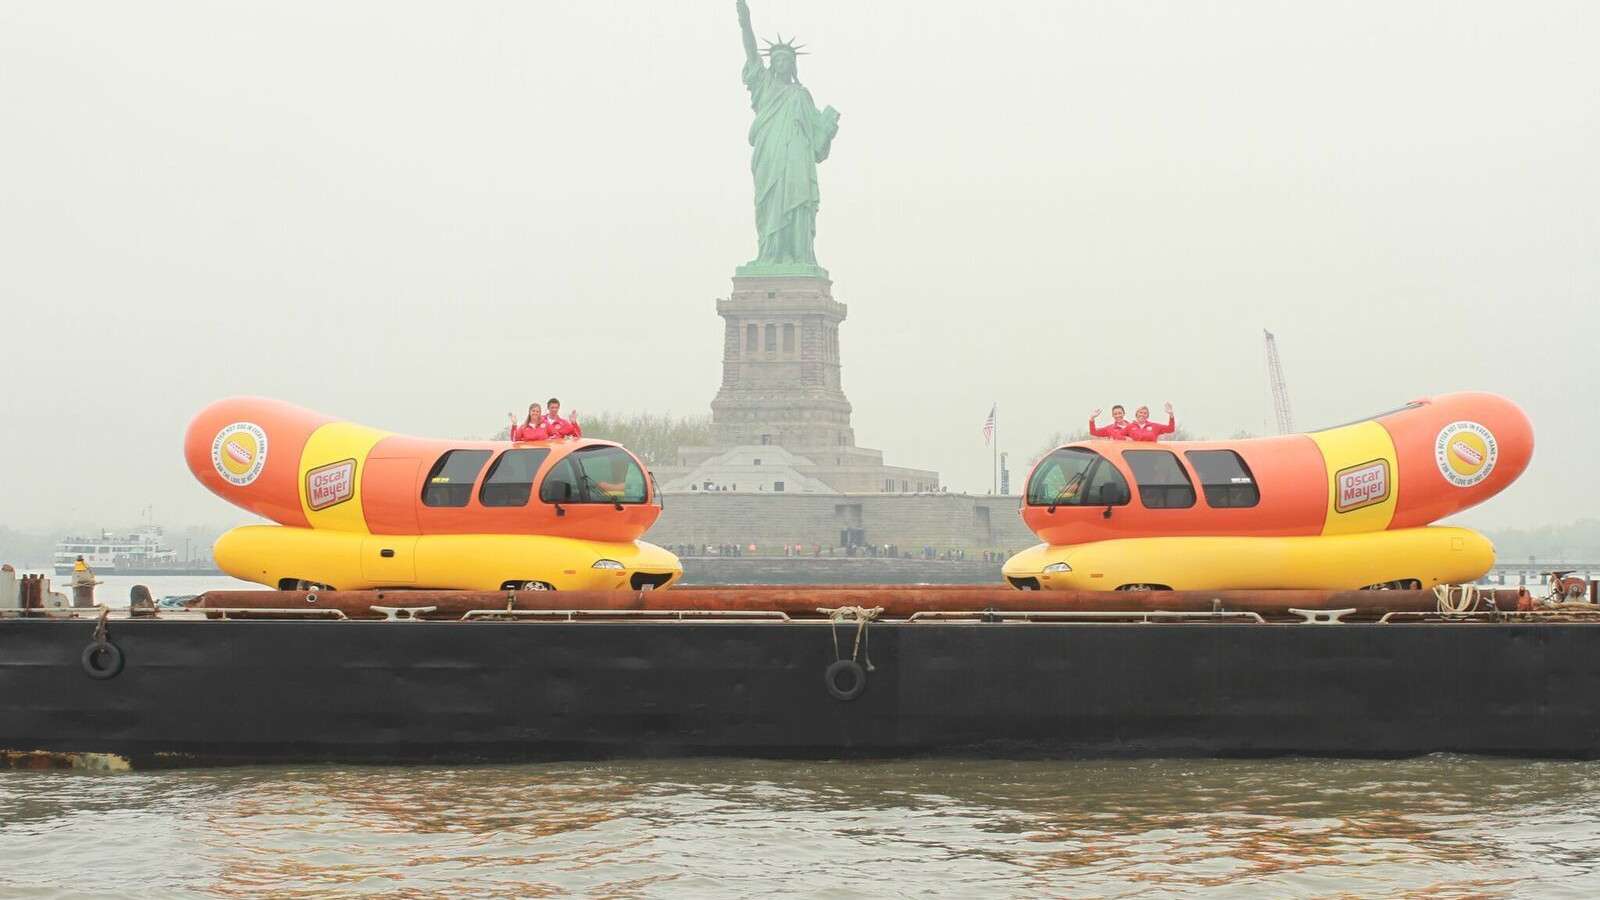 Oscar Mayer wienermobiles at the Statue of LIberty